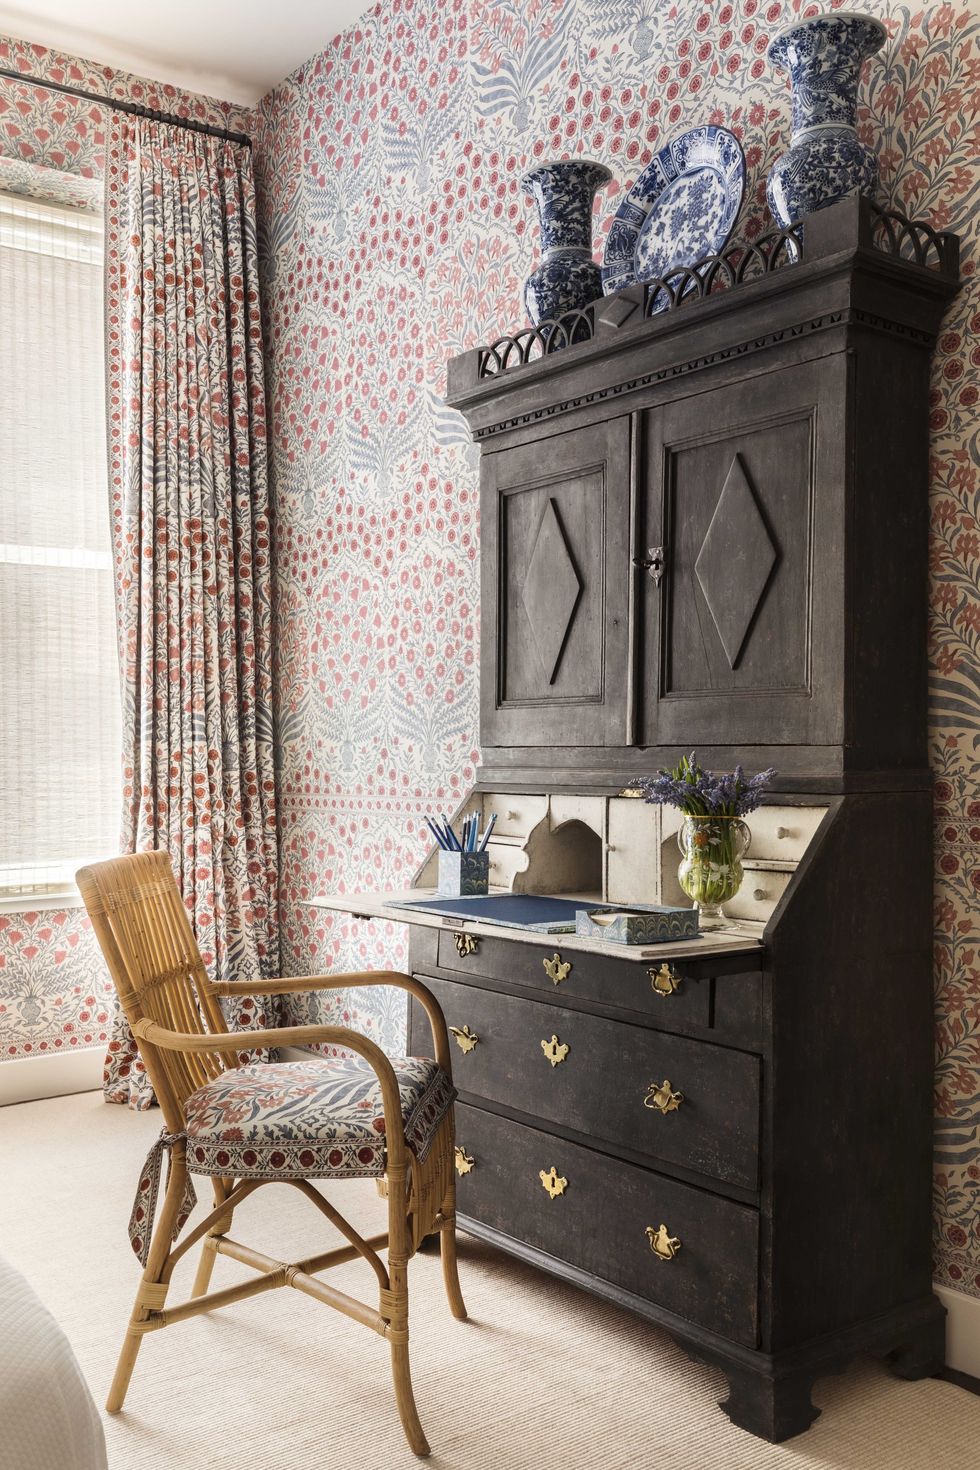 desk, floral wallpaper and floral curtains, wicker chair